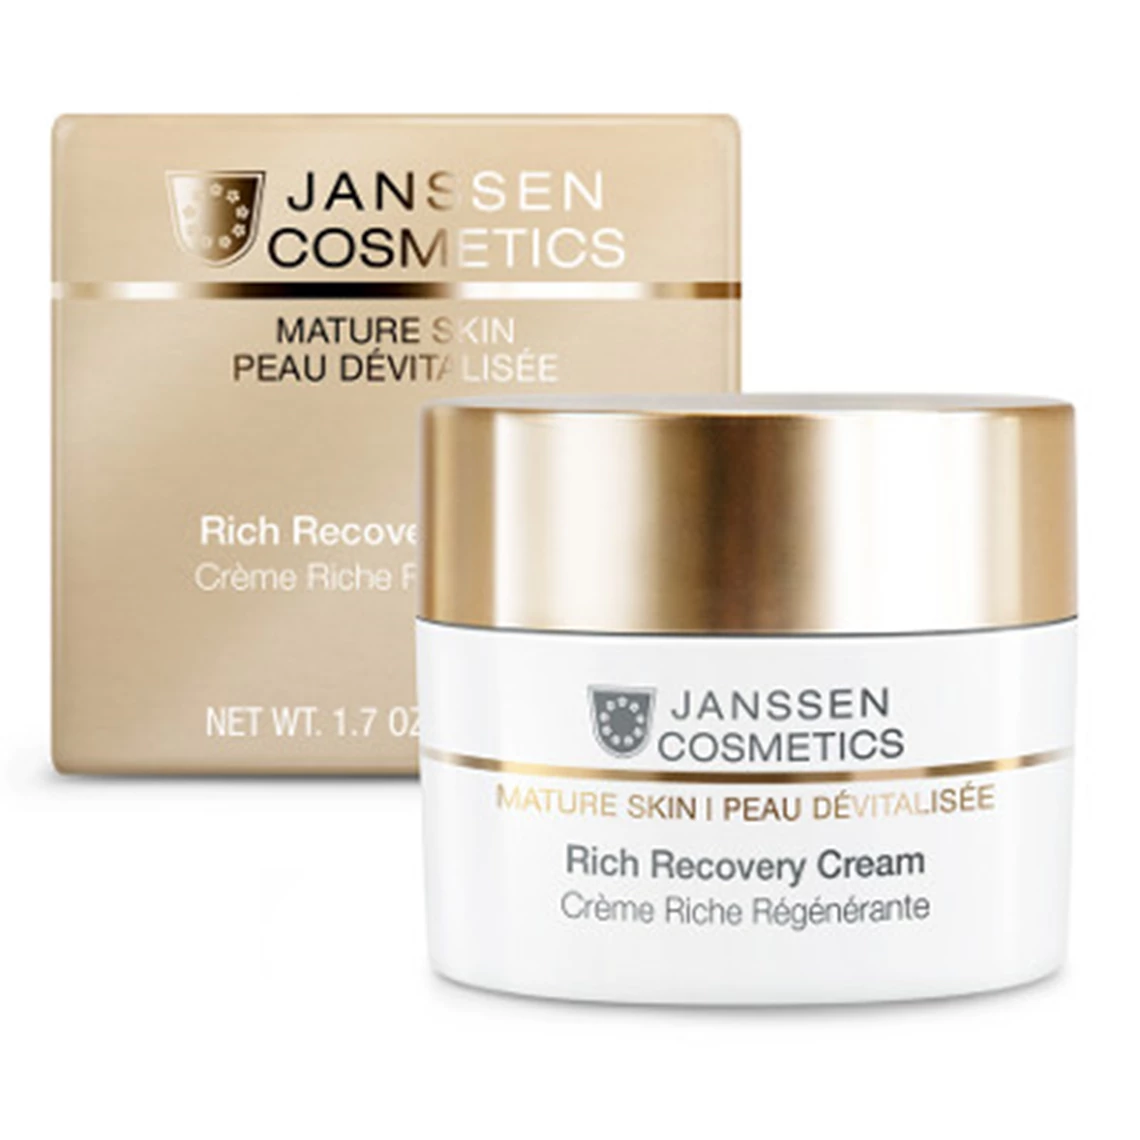 Rich Recovery Cream by Janssen Cosmetics